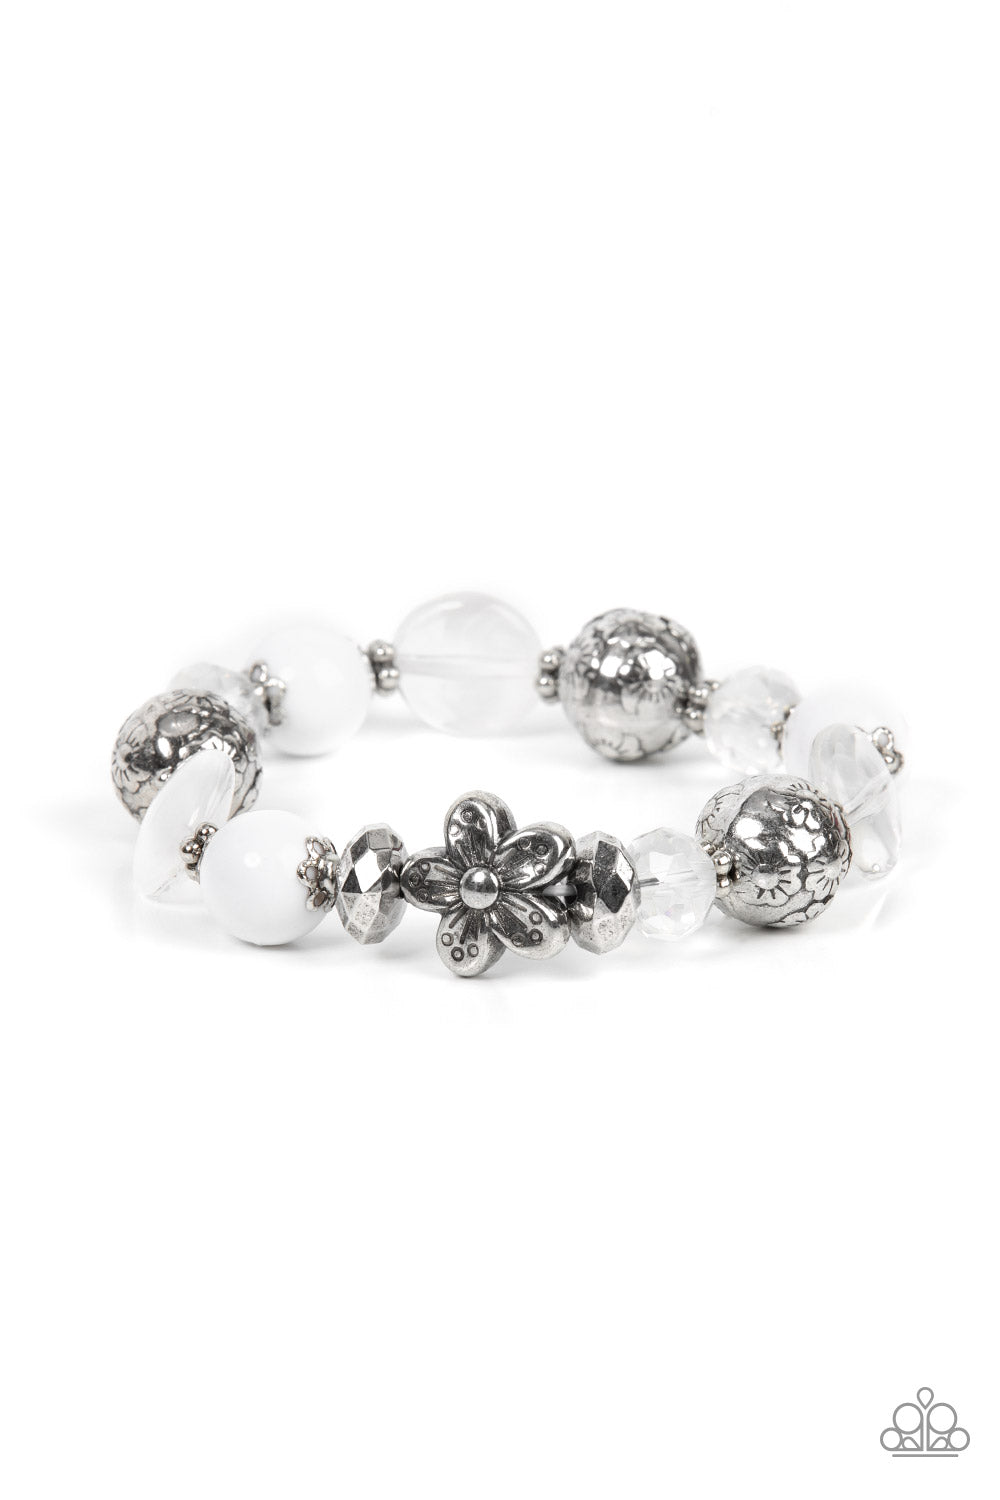 Pretty Persuasion White Bracelet - Paparazzi Accessories  An enchanting assortment of silver floral beads and studded silver rings join an opaque, glassy, and iridescent assortment of white beads along a stretchy band around the wrist for a whimsical pop of color.  Sold as one individual bracelet.